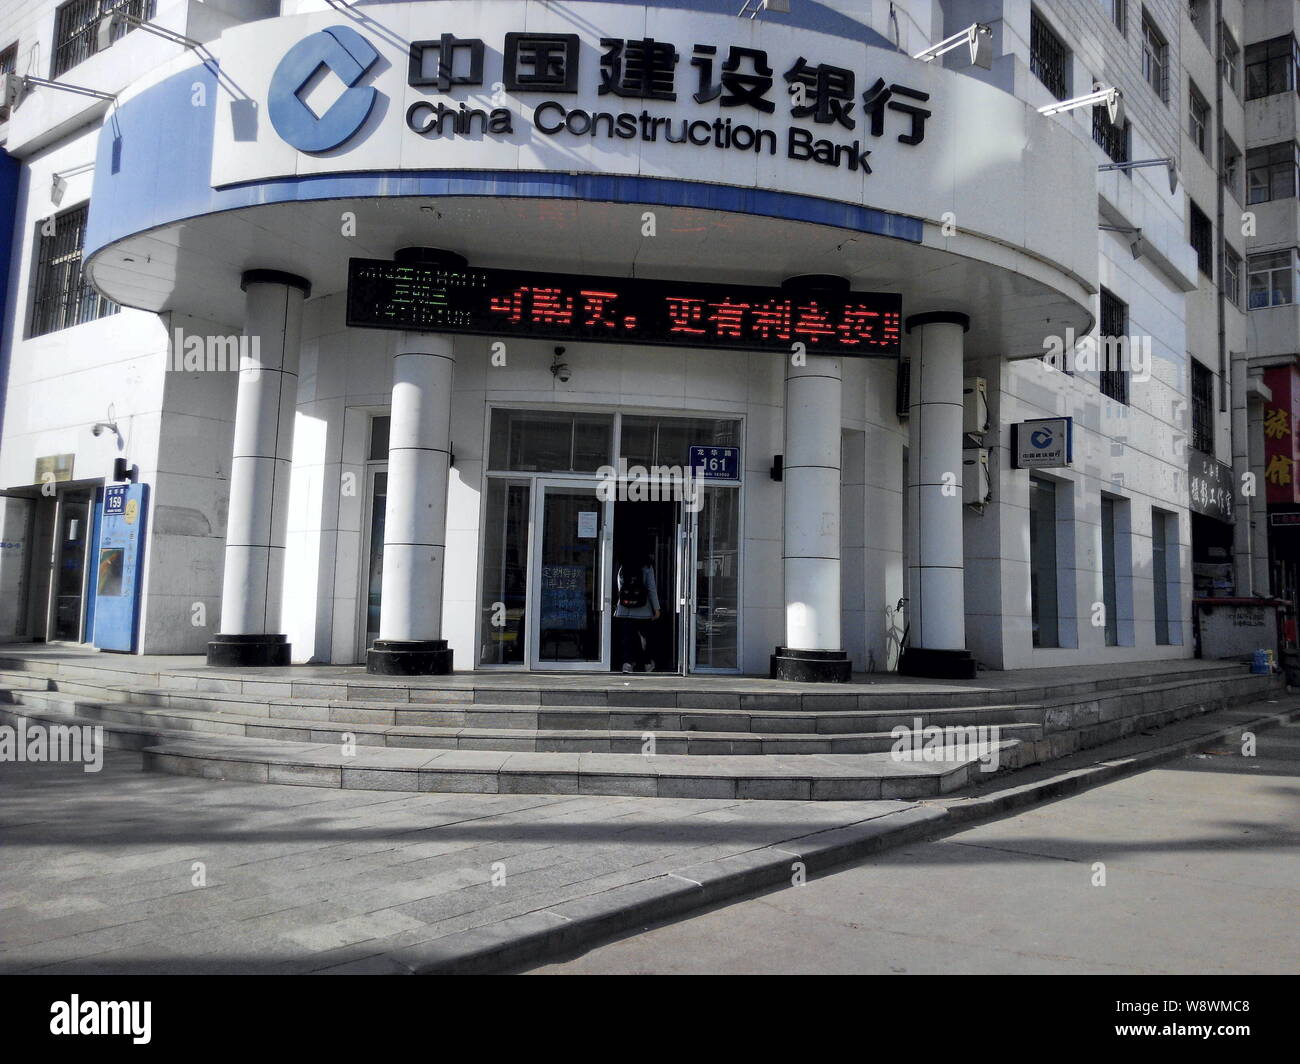 --FILE--View of a branch of China Construction Bank (CCB) in Qiqihar city, northeast Chinas Heilongjiang province, 1 October 2014.     China Construct Stock Photo